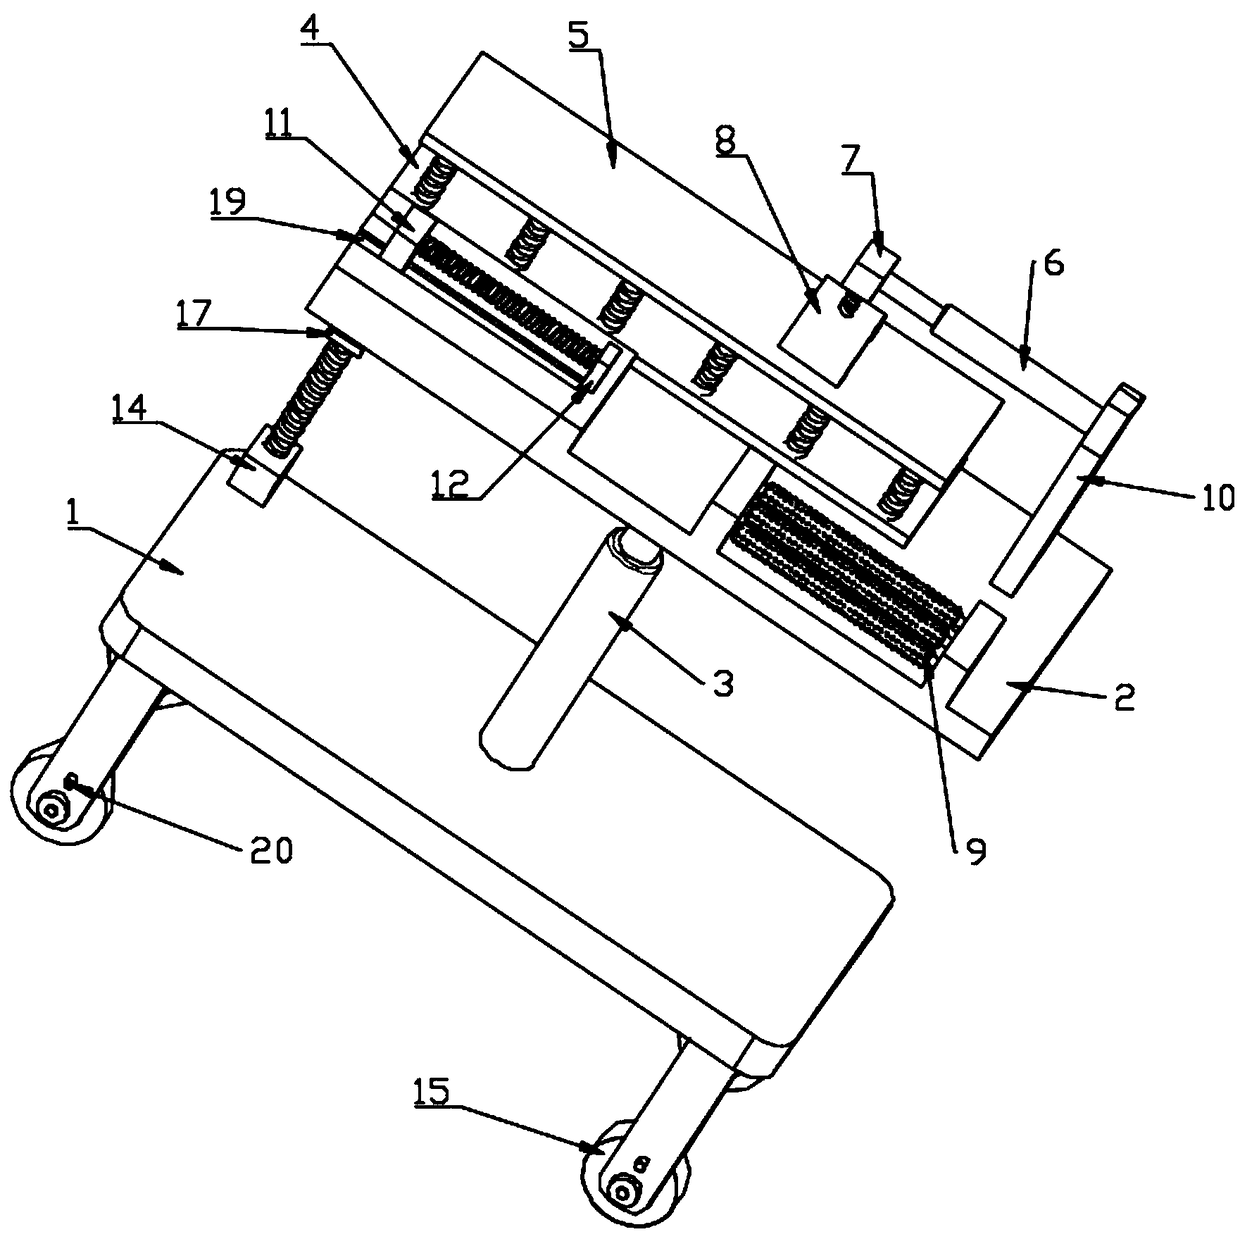 Gynecological lifting limb assistant support device